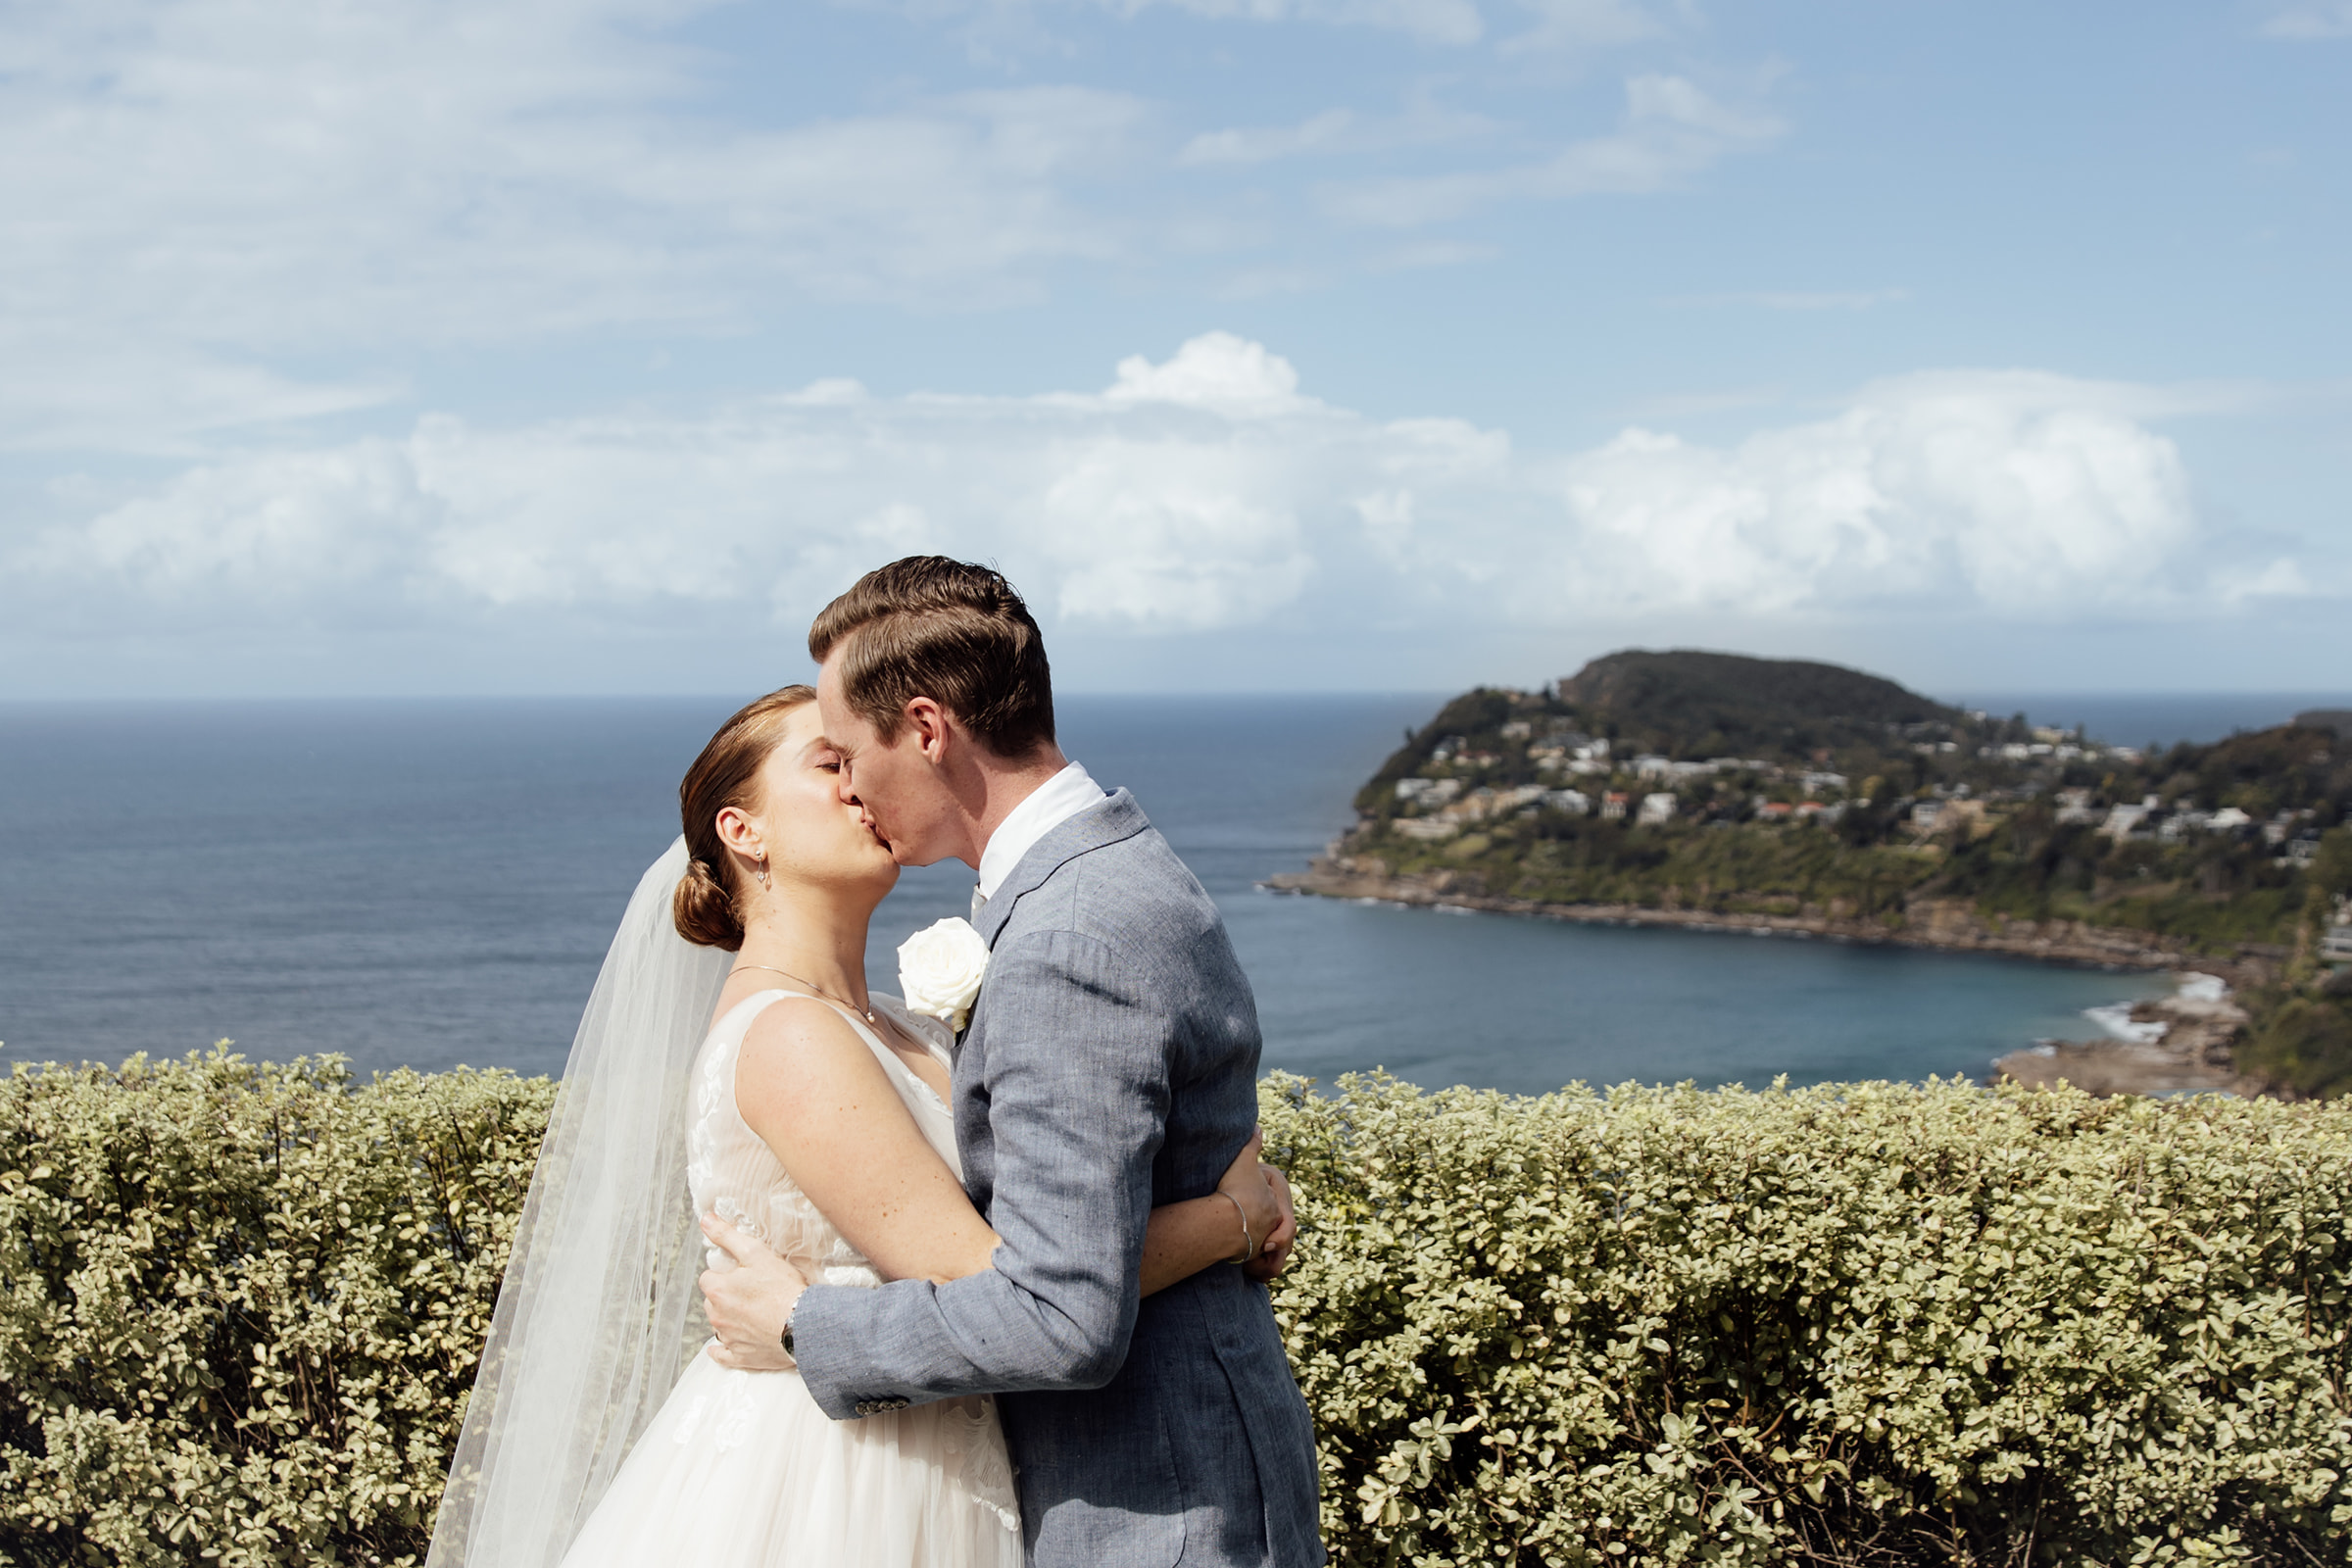 A couple who got married at Jonah's Whale beach